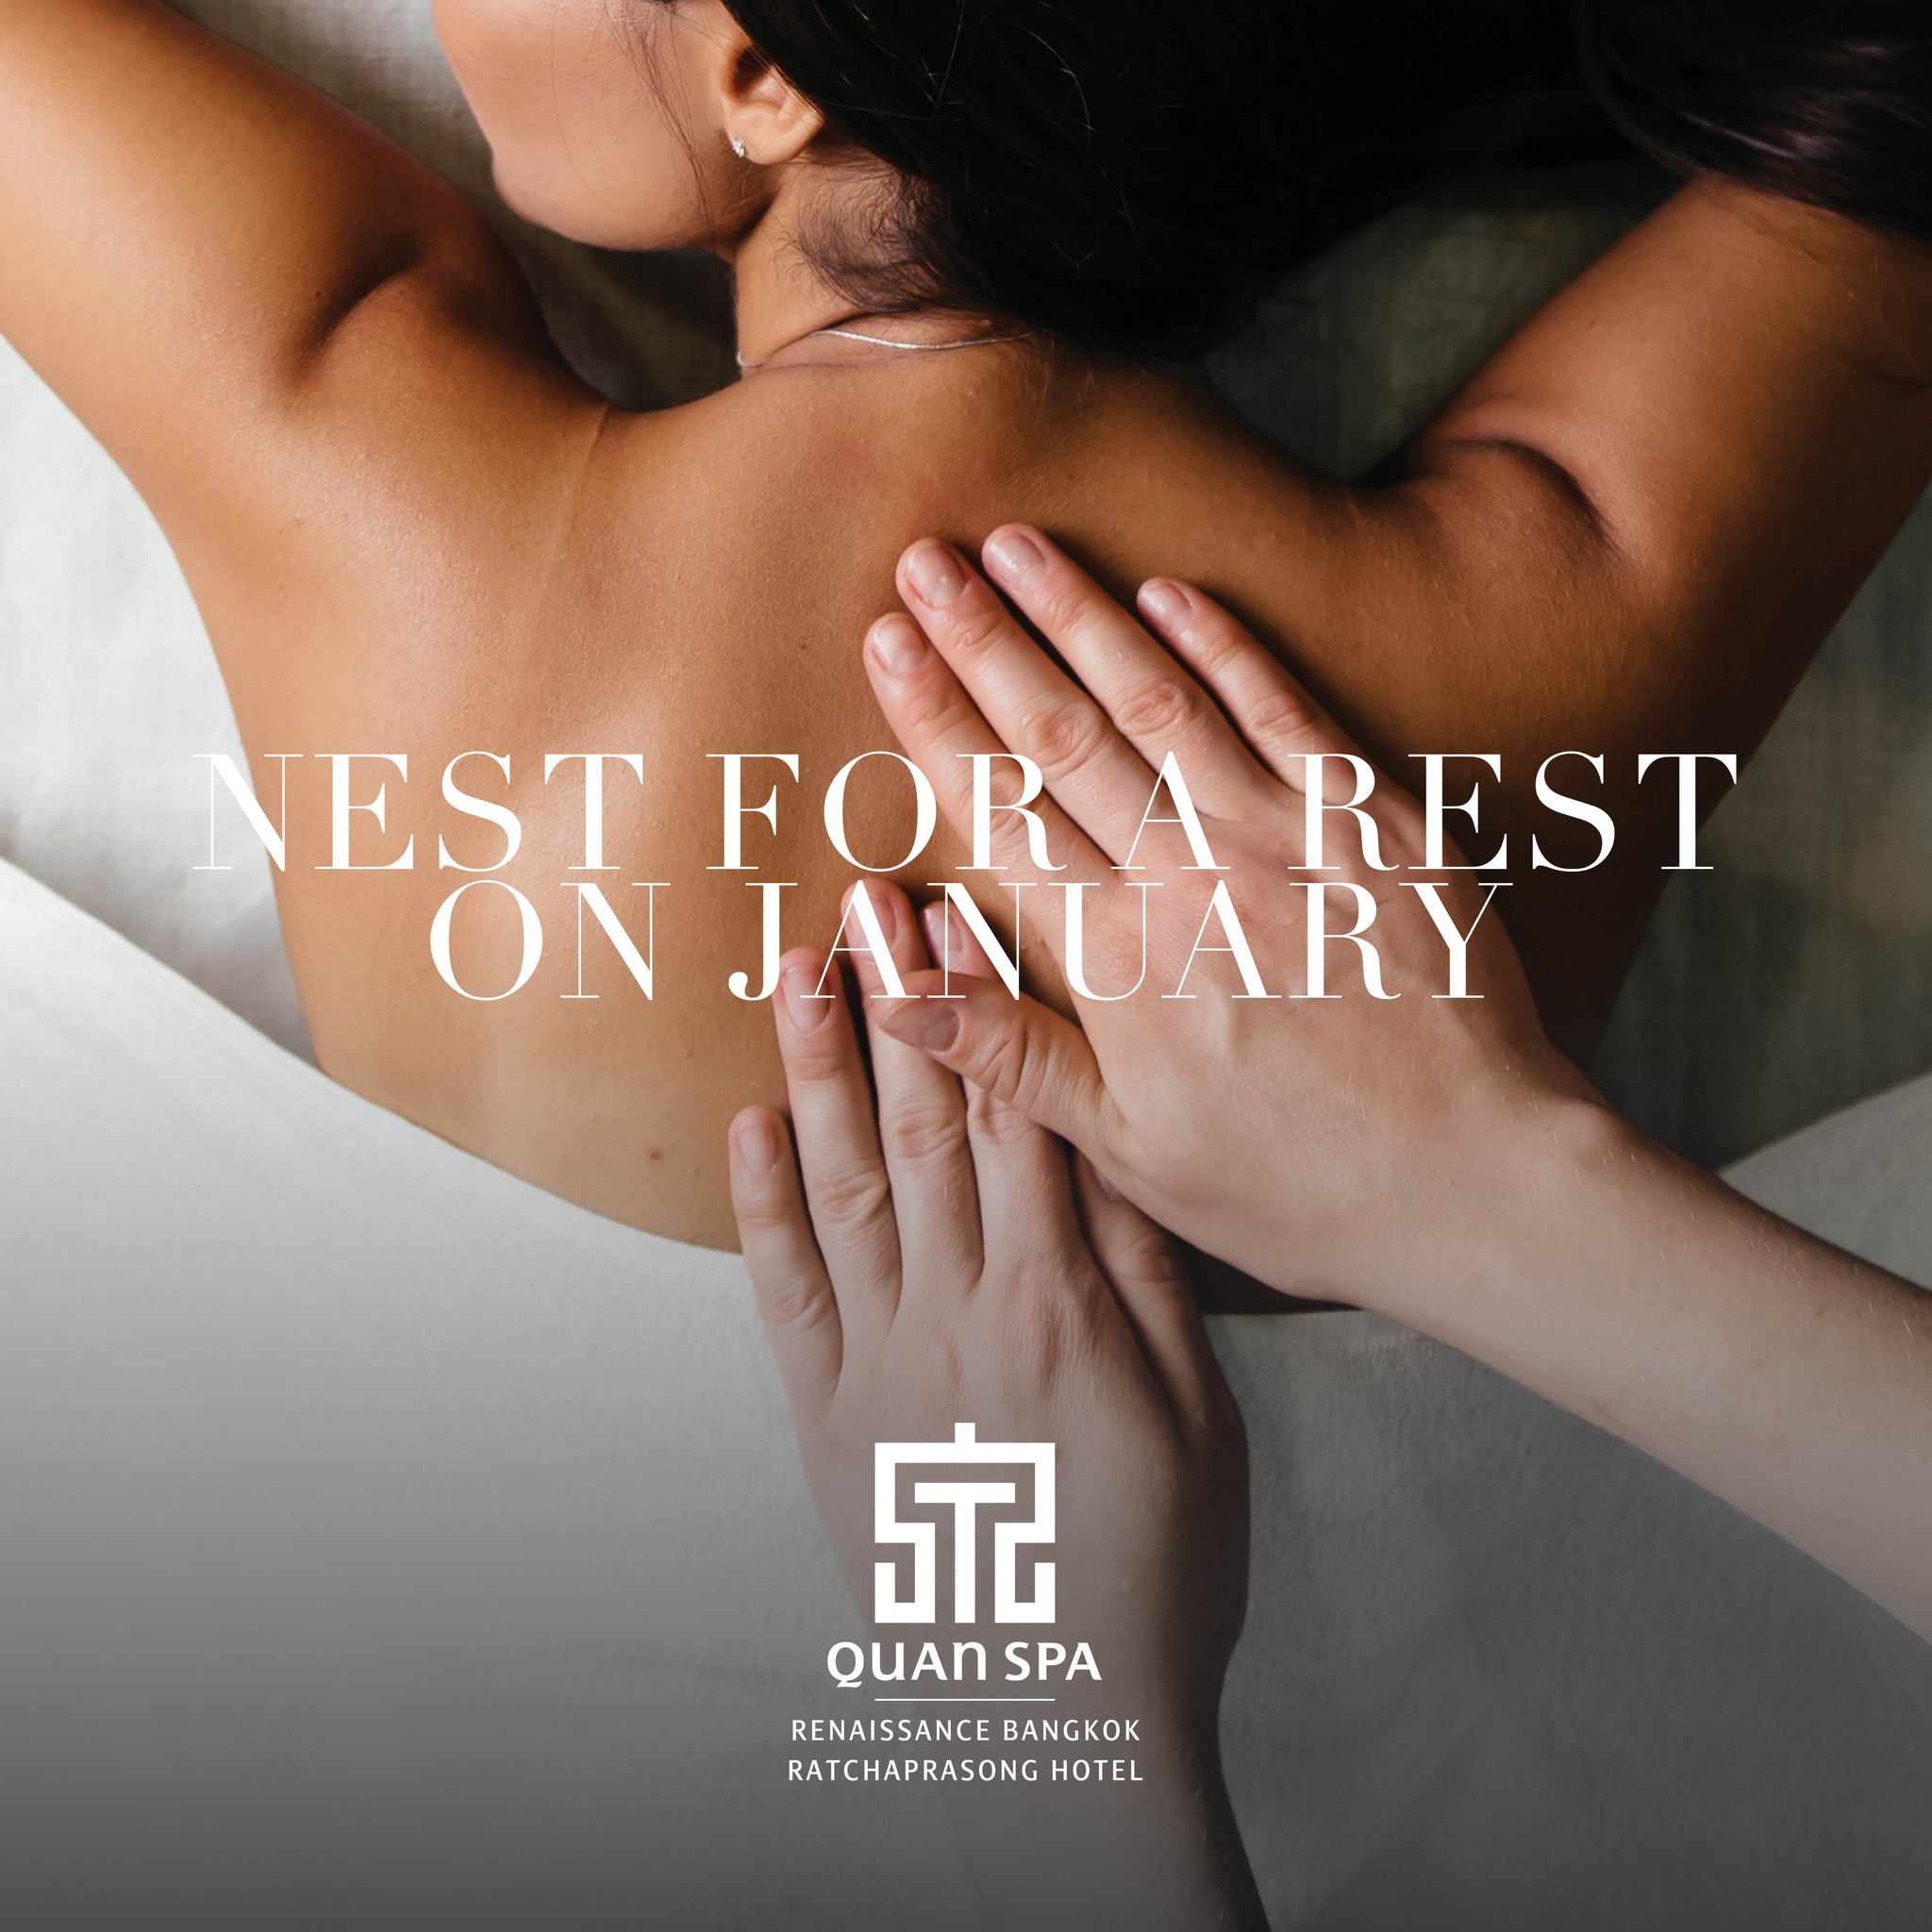 Nest for a rest on January @ Quan spa